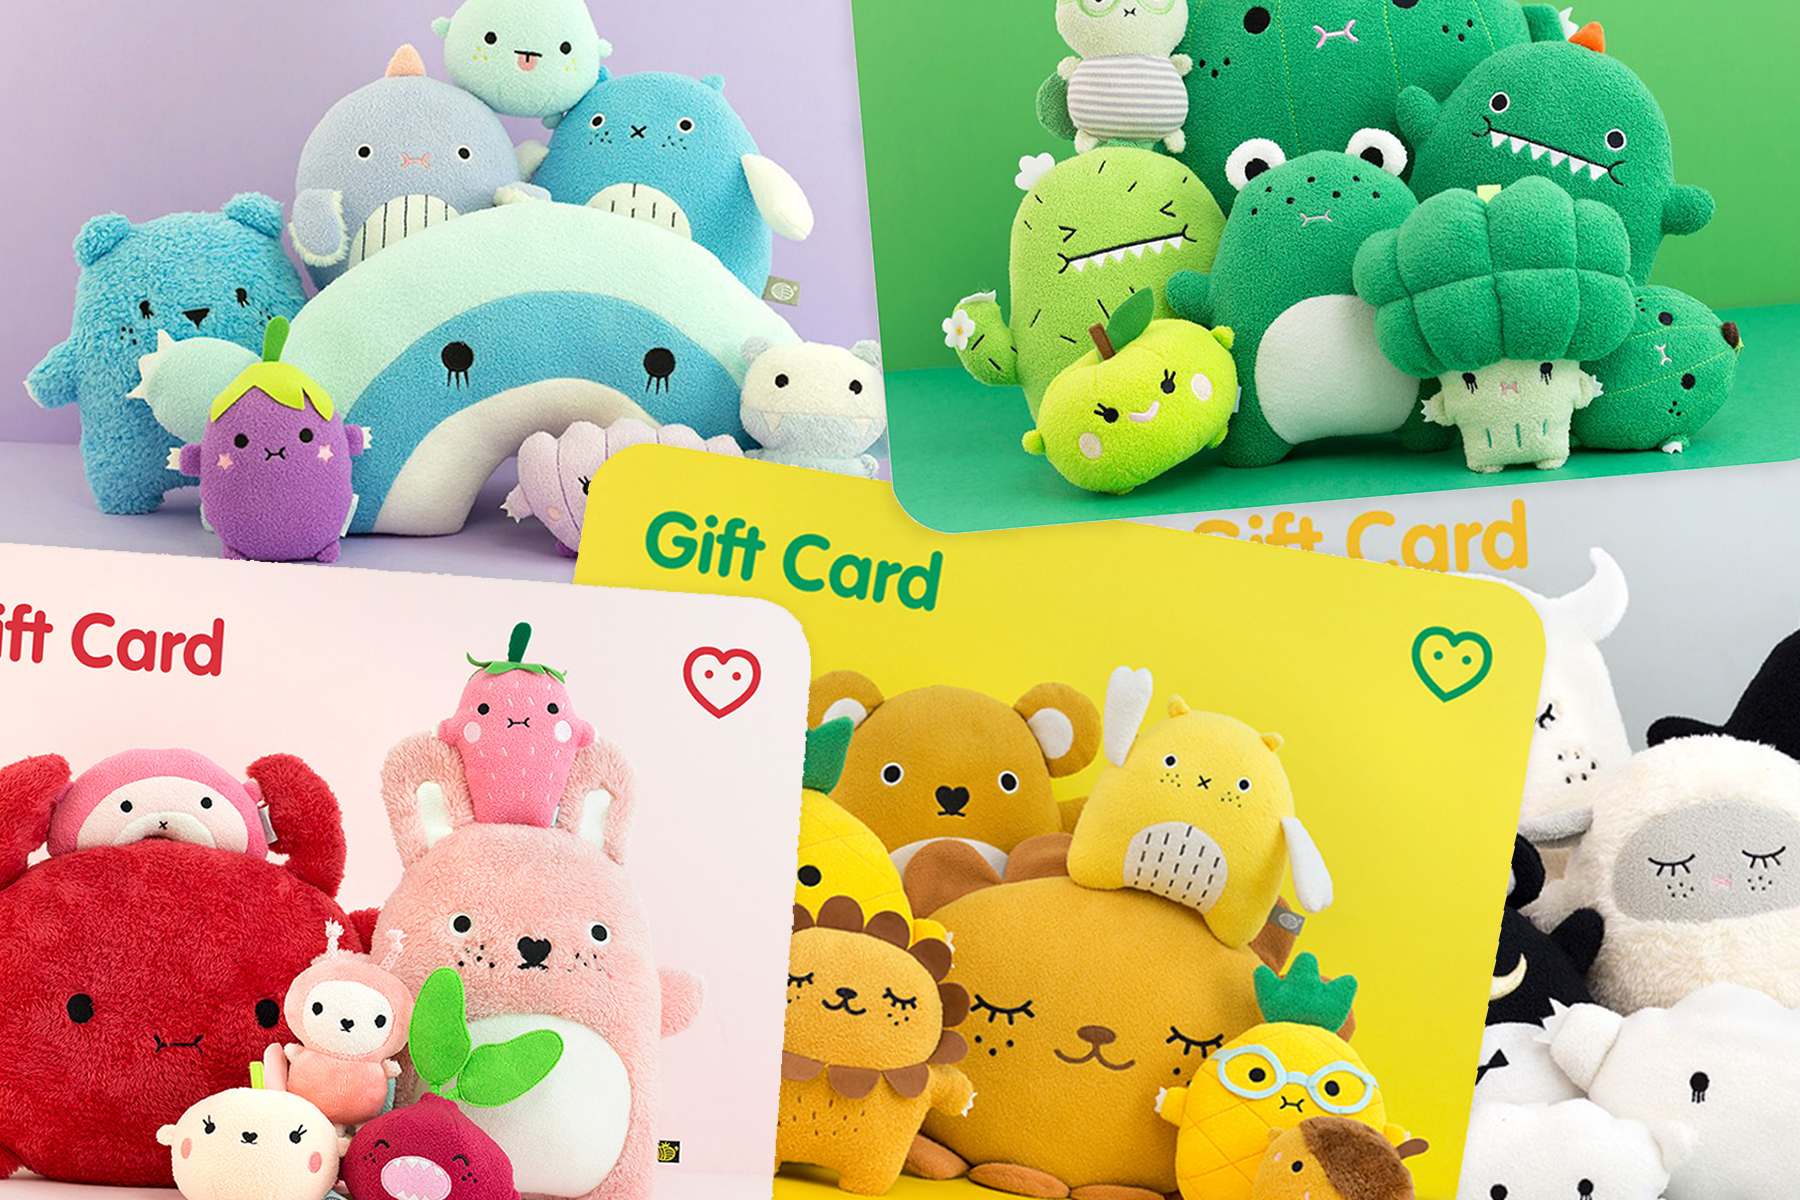 Noodoll Gift Cards